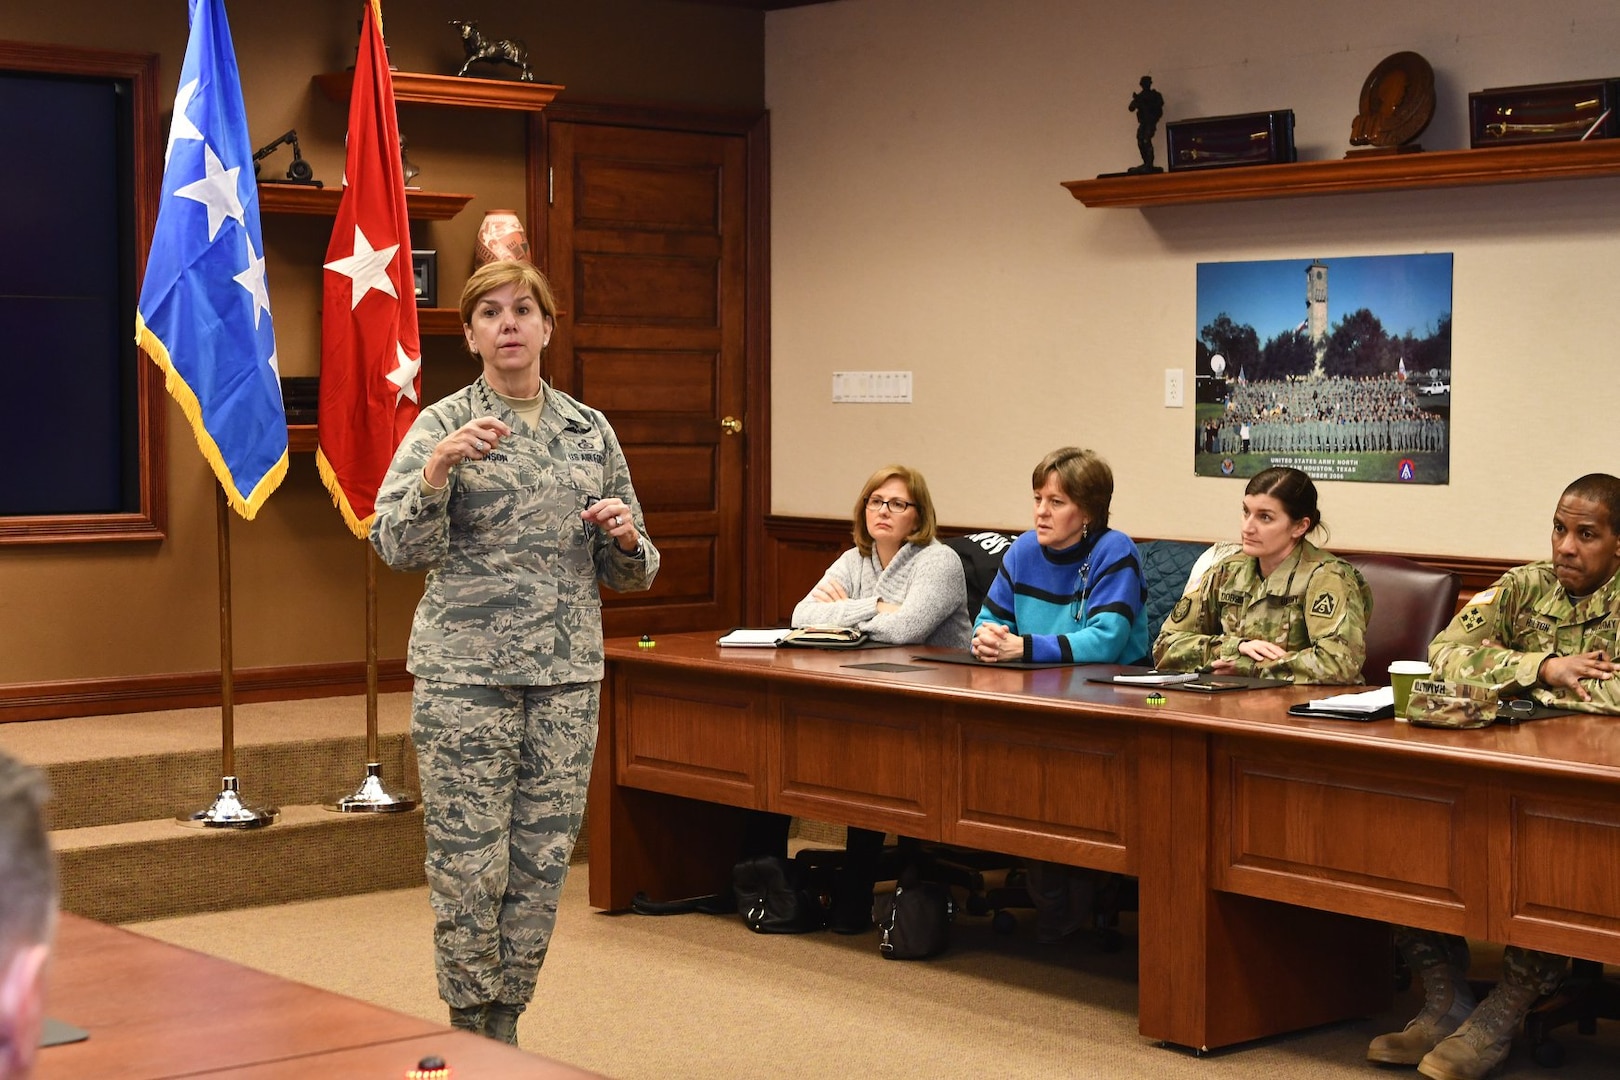 U.S. Army North (Fifth Army) hosted a town hall meeting at the historic Quadrangle Jan. 16 with Gen. Lori J. Robinson, commander, North American Aerospace Defense Command and United States Northern Command.